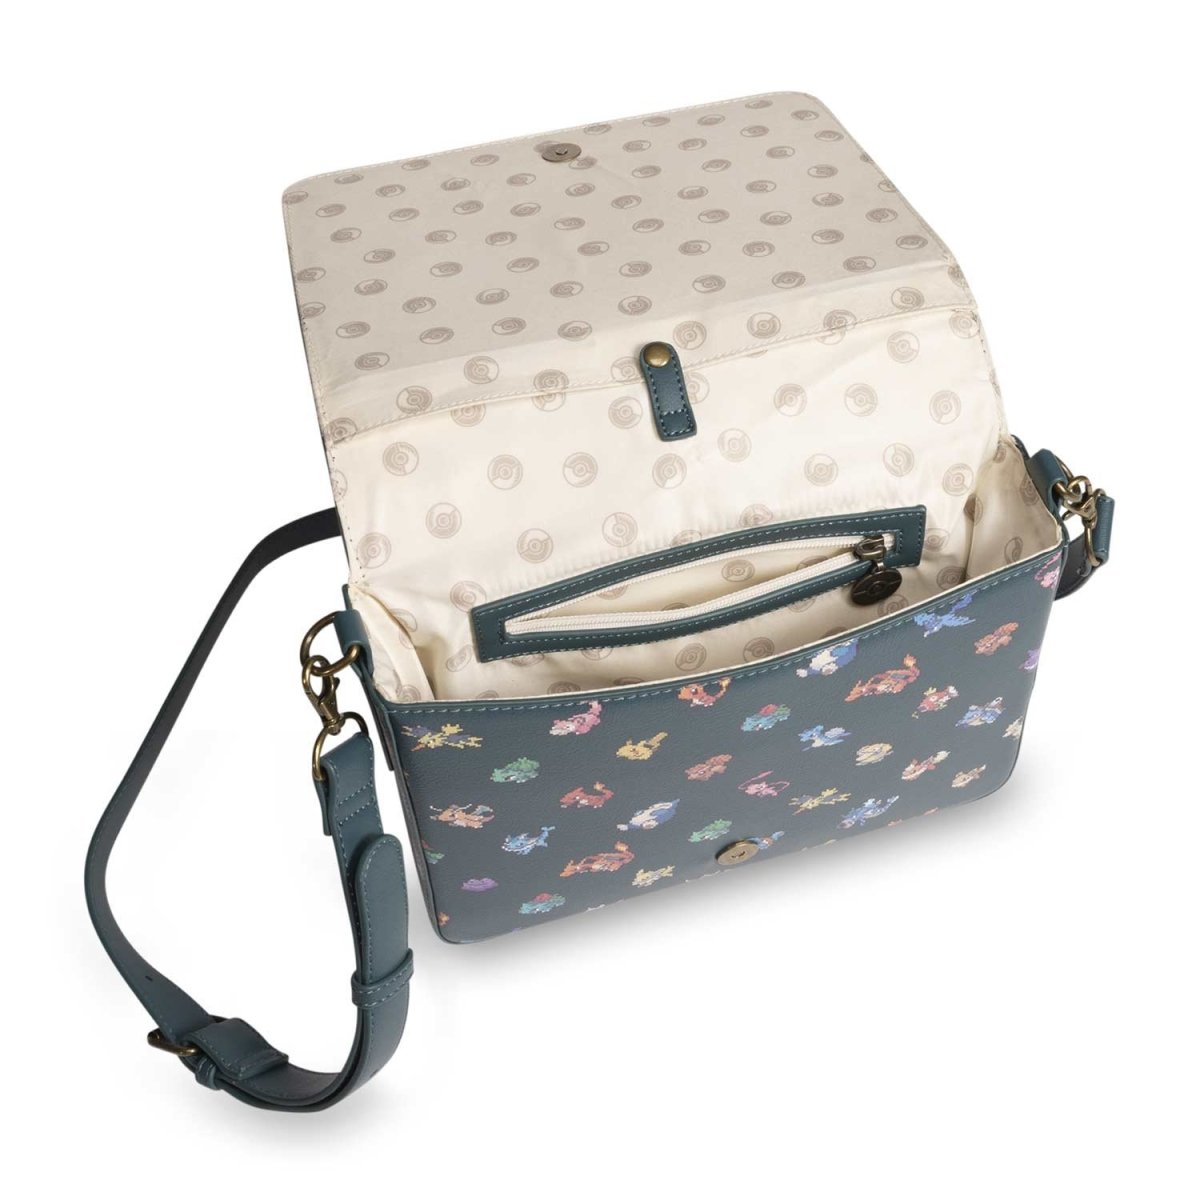 Buy Cath Kidston Slim Coated Zip Purse from the Next UK online shop